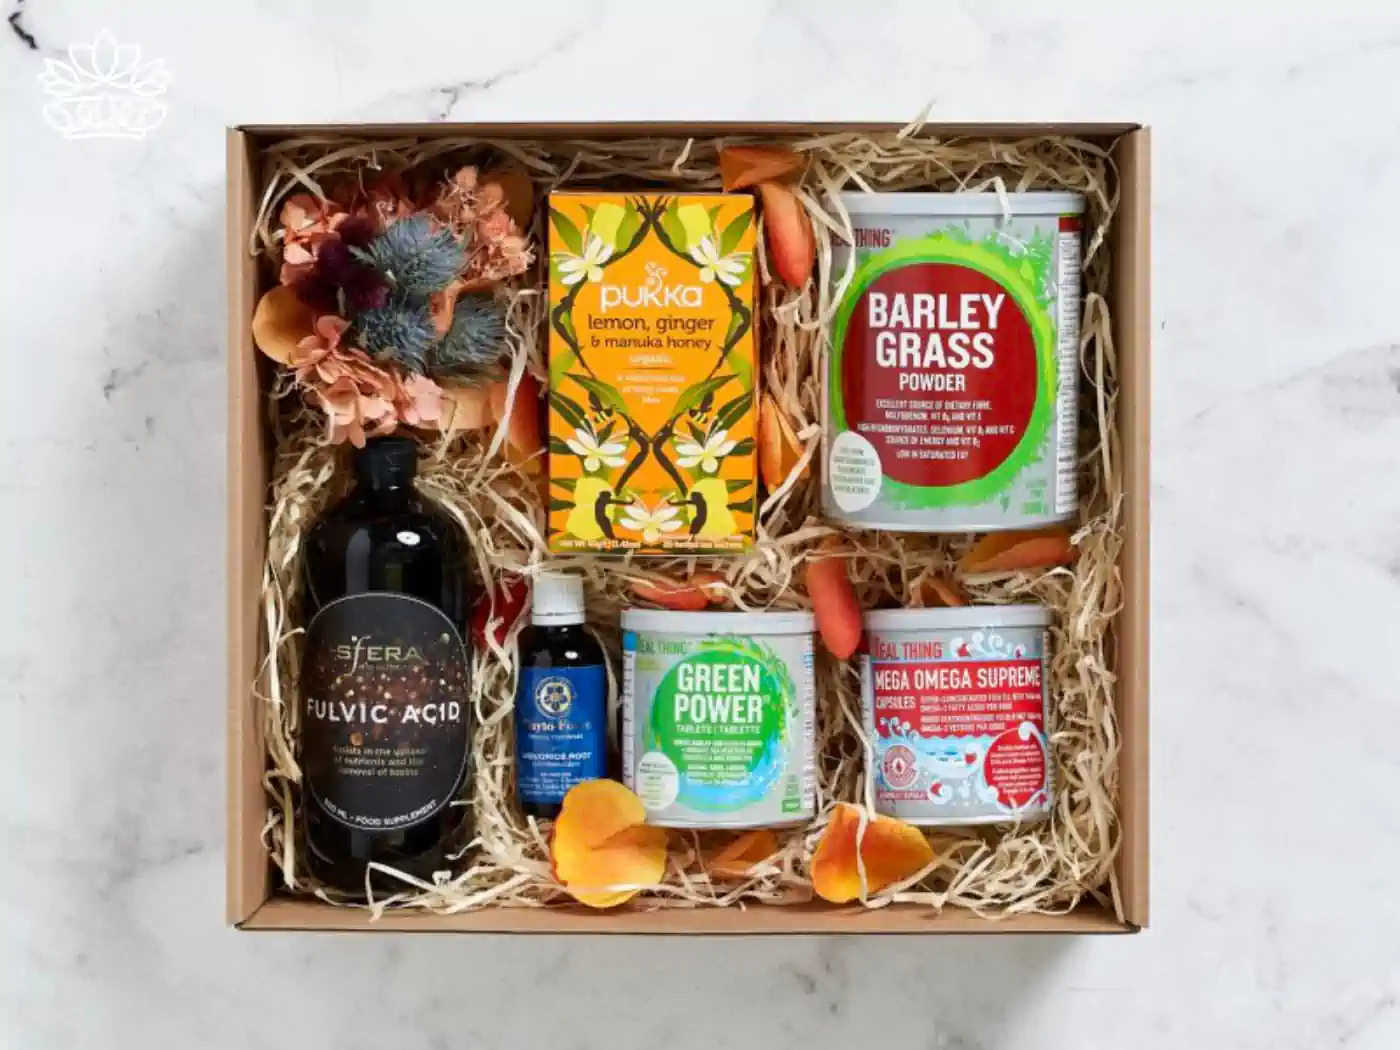 A curated selection of health products in a gift box including Pukka lemon, ginger & manuka honey tea, Barley Grass powder, Mega Omega Supreme capsules, Green Power blend, and Fulvic Acid supplement, surrounded by natural packing and decorative flowers, from the mental health gift boxes by Fabulous Flowers and Gifts. Carefully selected to boost wellness, delivered with deep care and consideration.